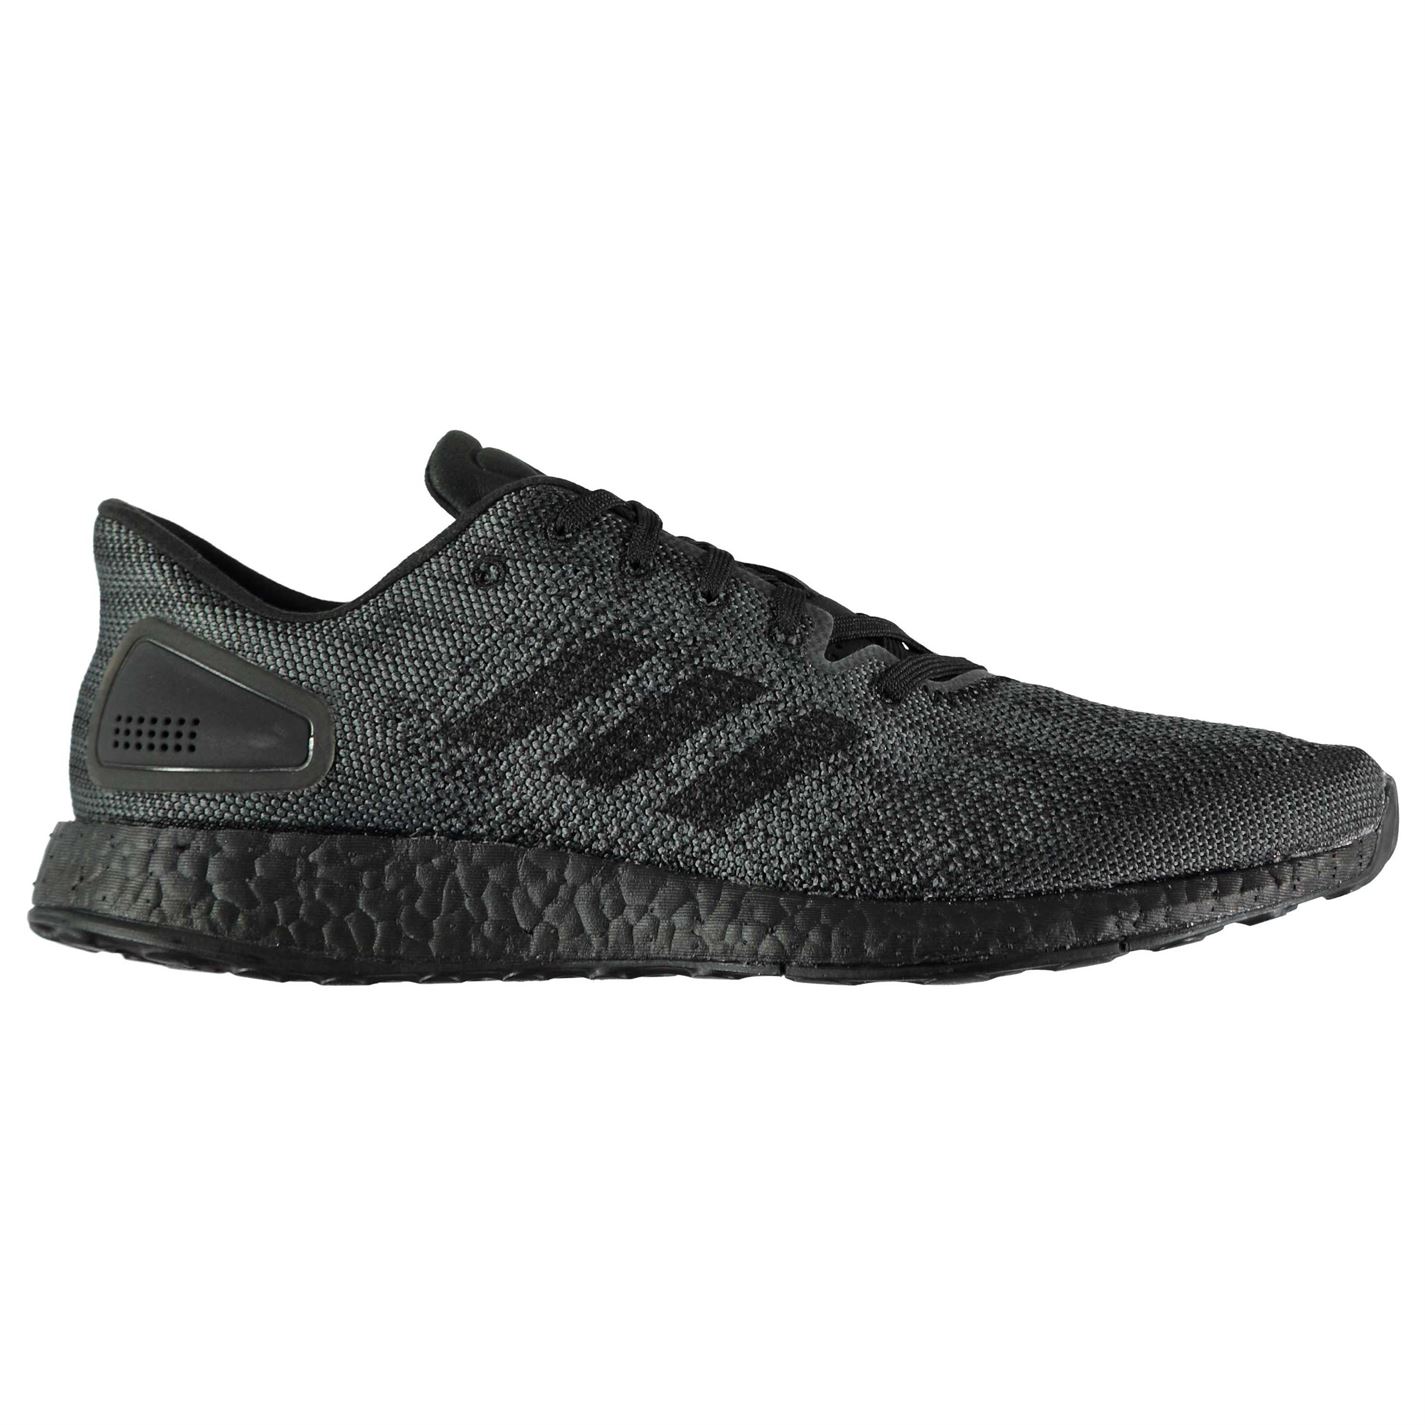 Adidas Pure Boost DPR Mens Running Shoes